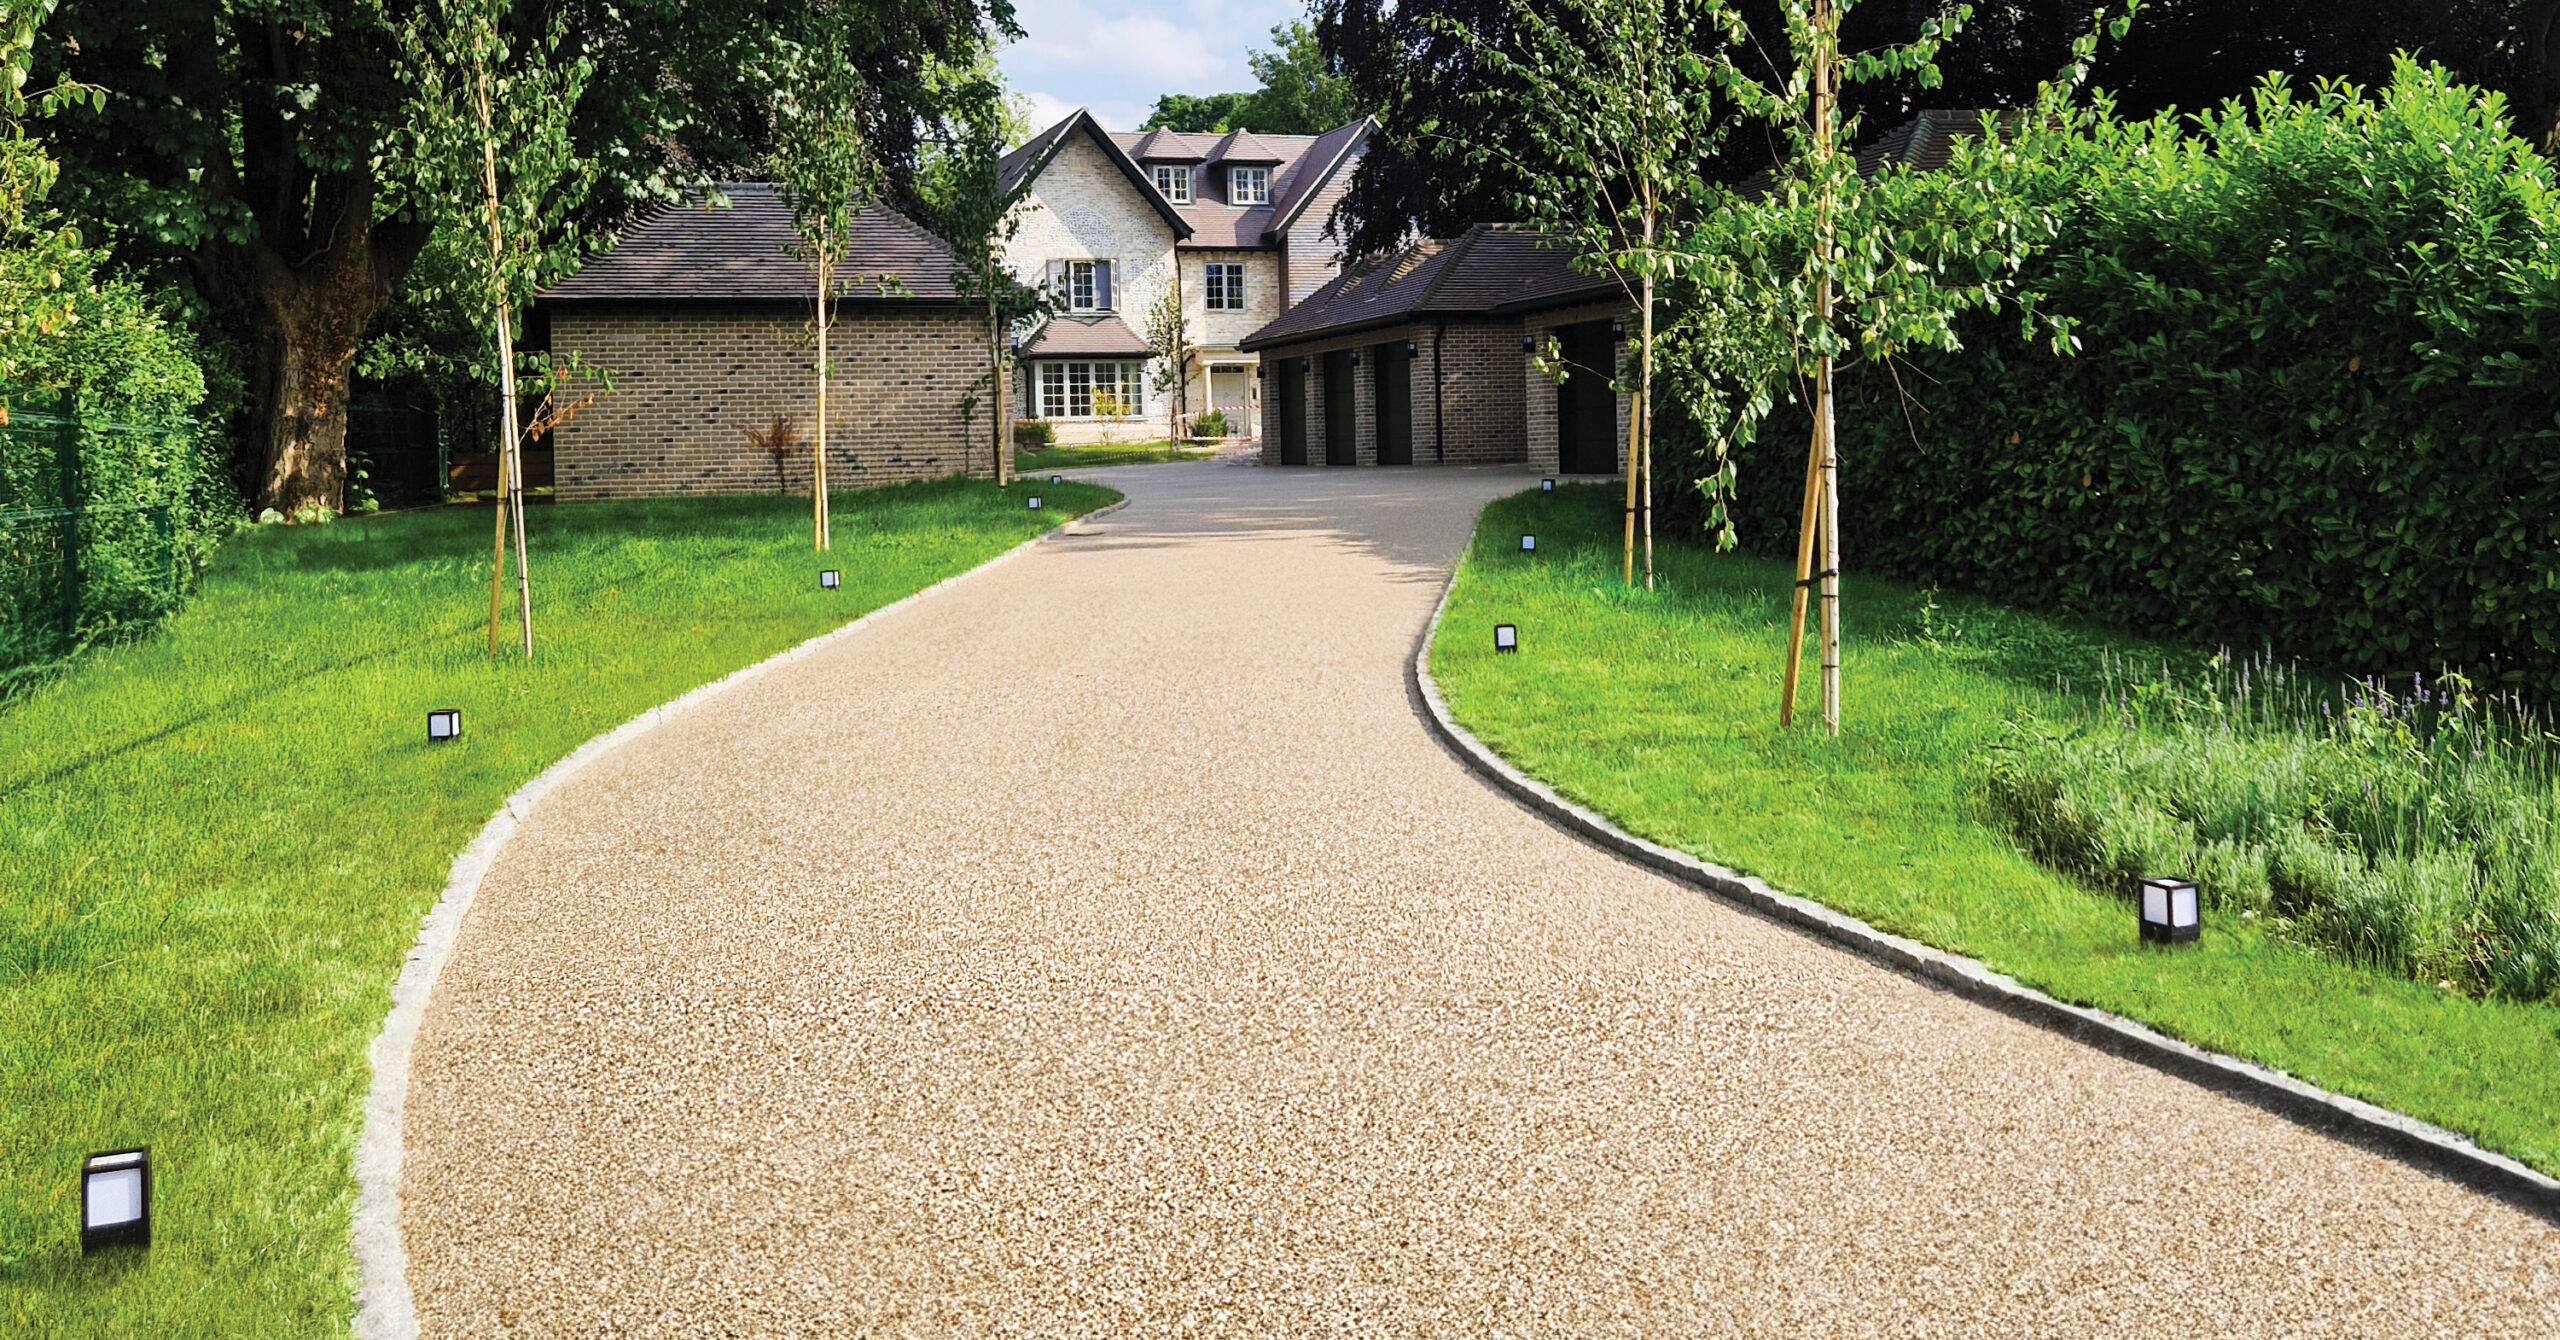 Aspirational driveway laid with Addagrip's Addaset in Scandinavian Bronze style.